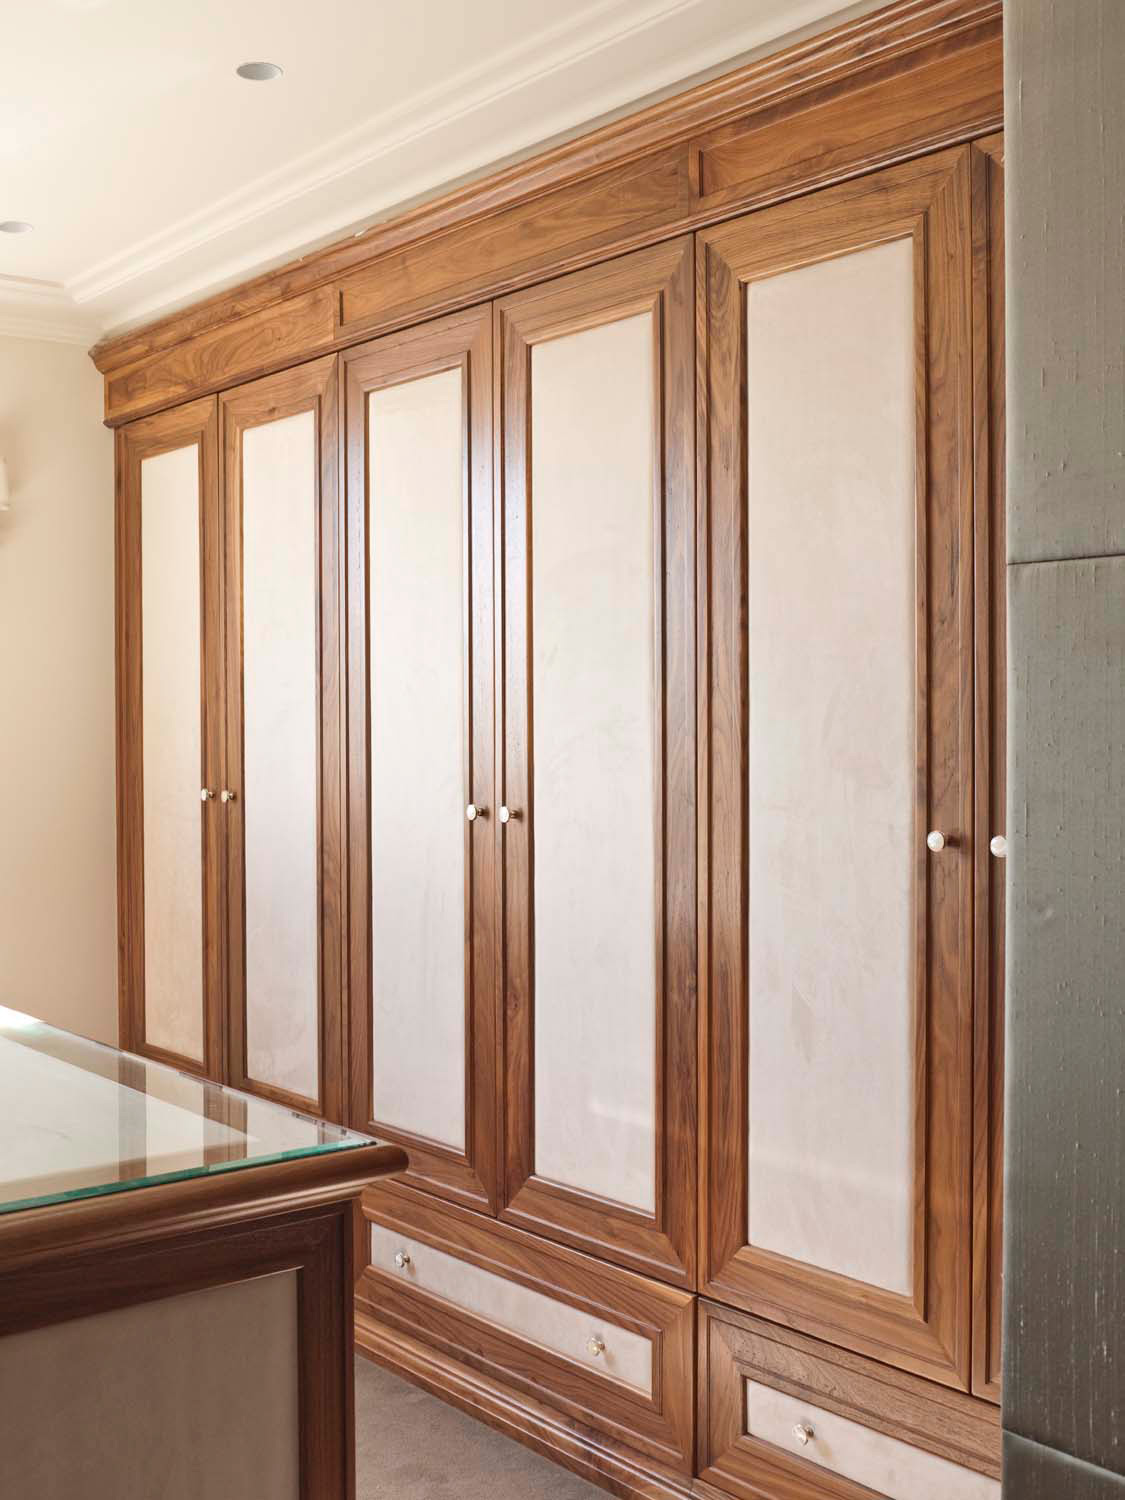 10 Doors for cupboard in study or office custom made in timber finish with panels